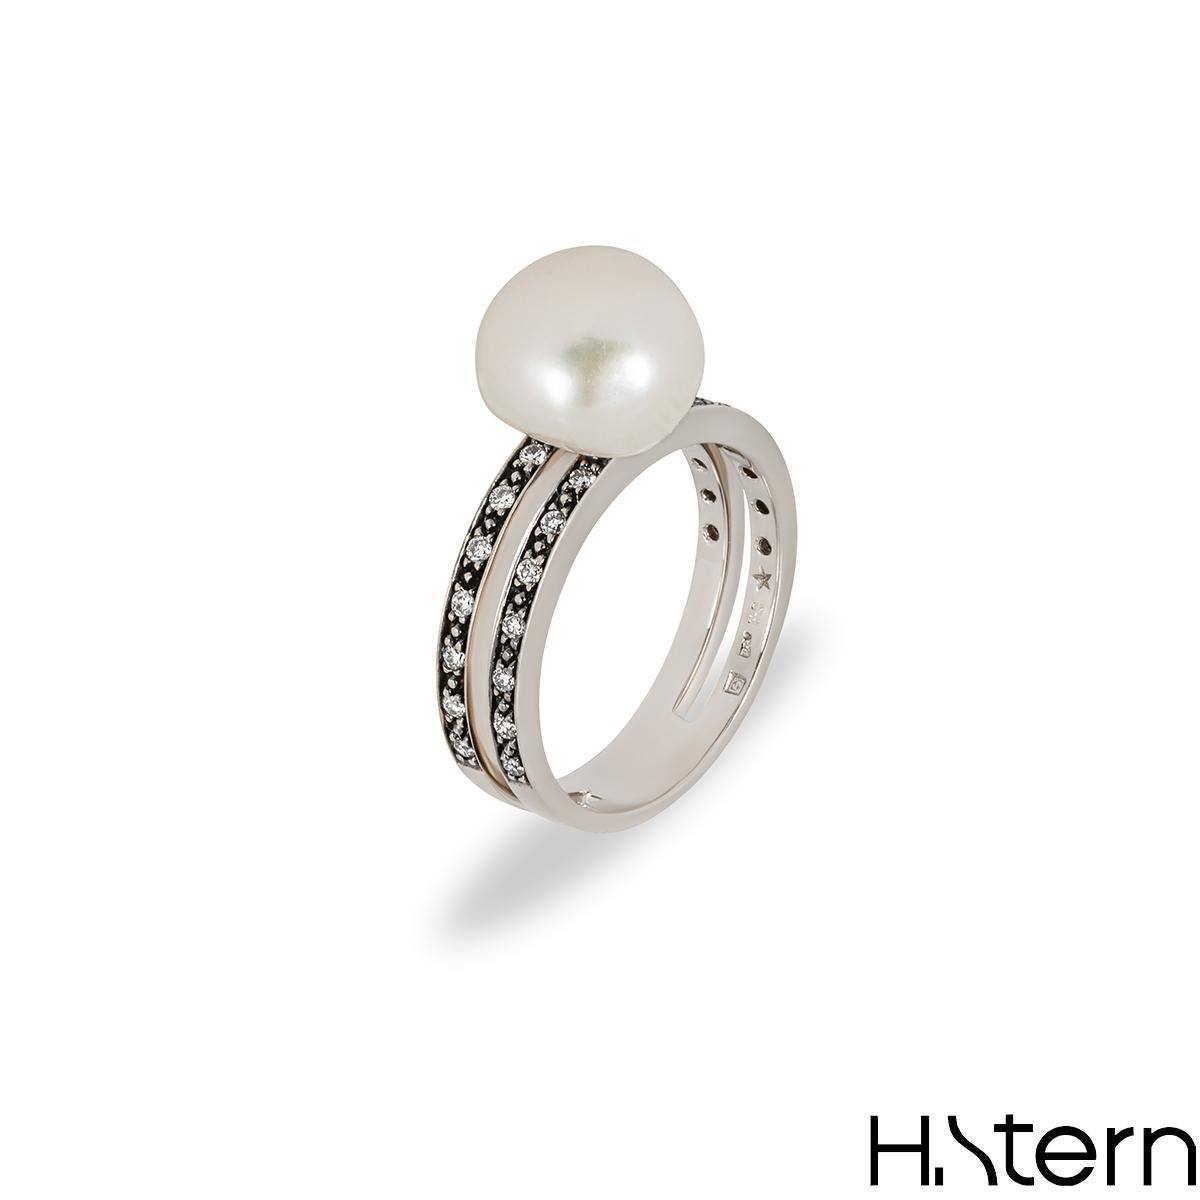 A unique 18k Noble gold ring by H. Stern from the Pearl collection. The ring features a white pearl set to the top of a split shank band that is composed of a mixture of yellow and white gold. Further complementing the pearl are 28 round brilliant